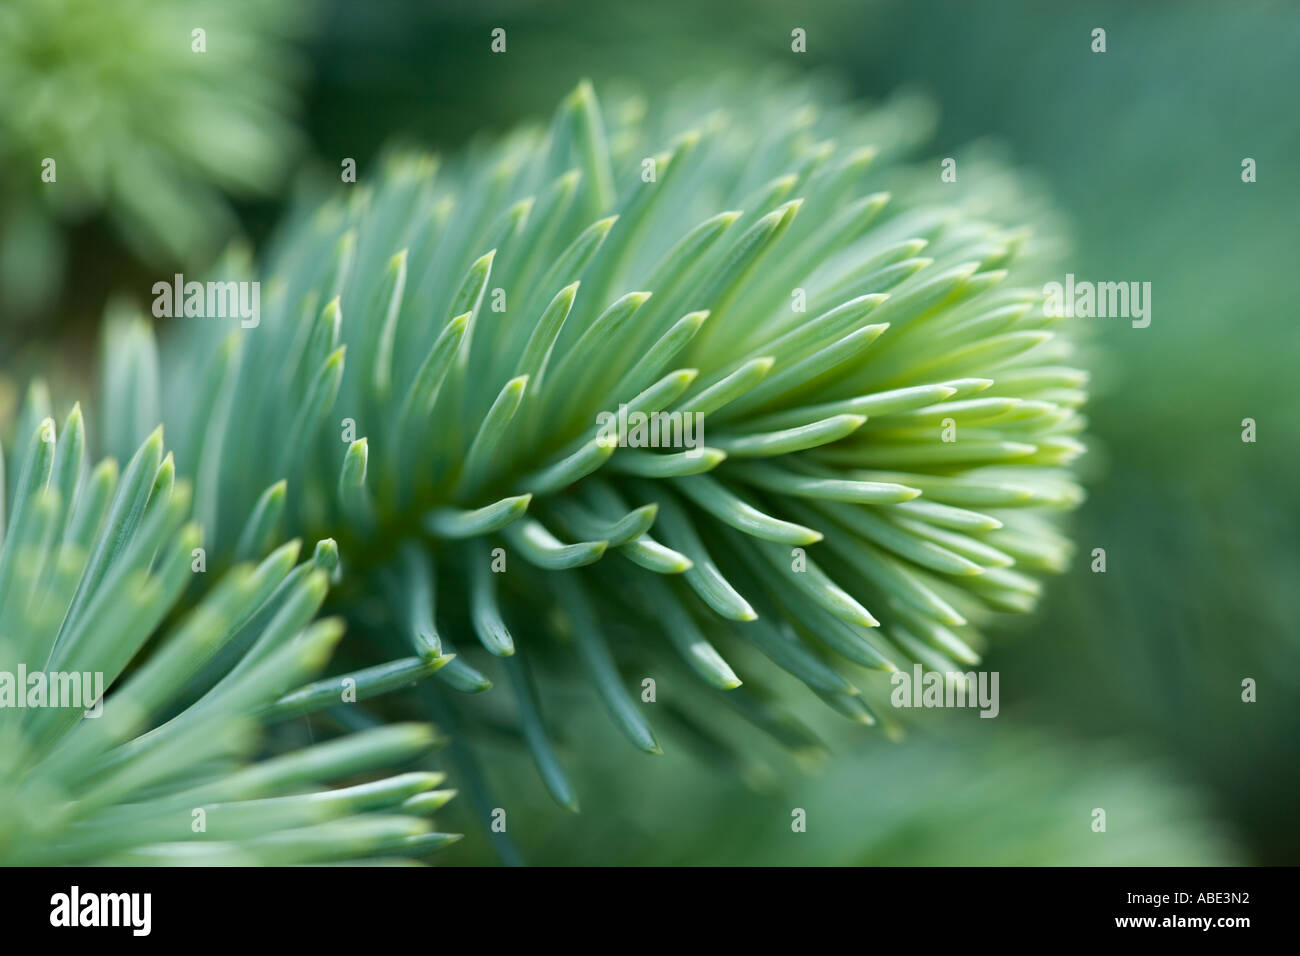 Young growing needles of Colorado spruce Stock Photo